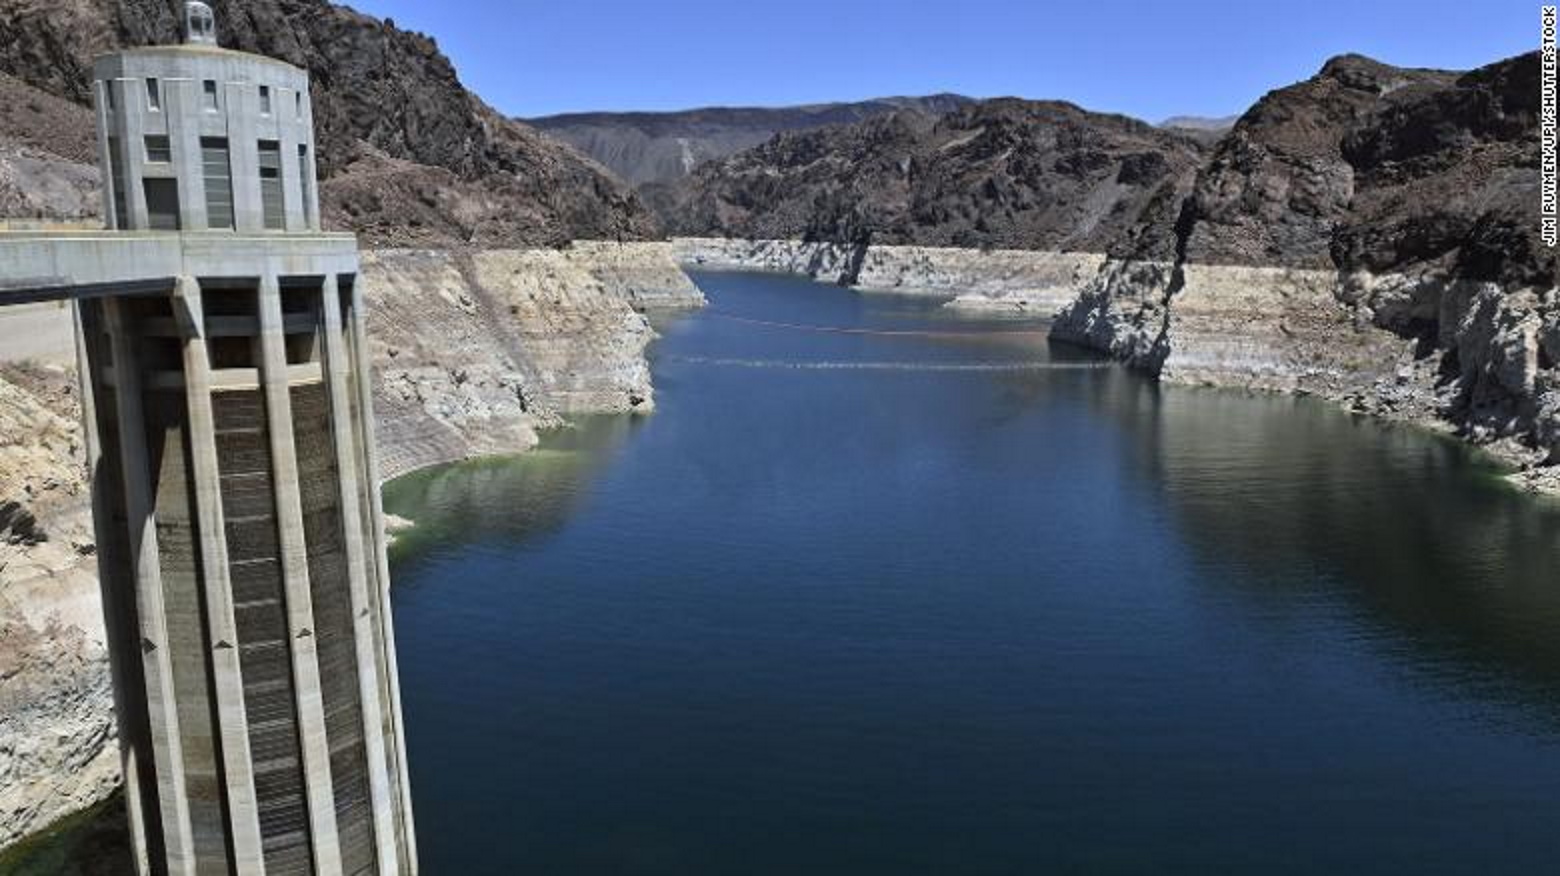 Lake Mead, photographed here on 22 May 2022, is running well below the federal government's predicted water level. Photo: Jim Ruymen / UPI / Shutterstock